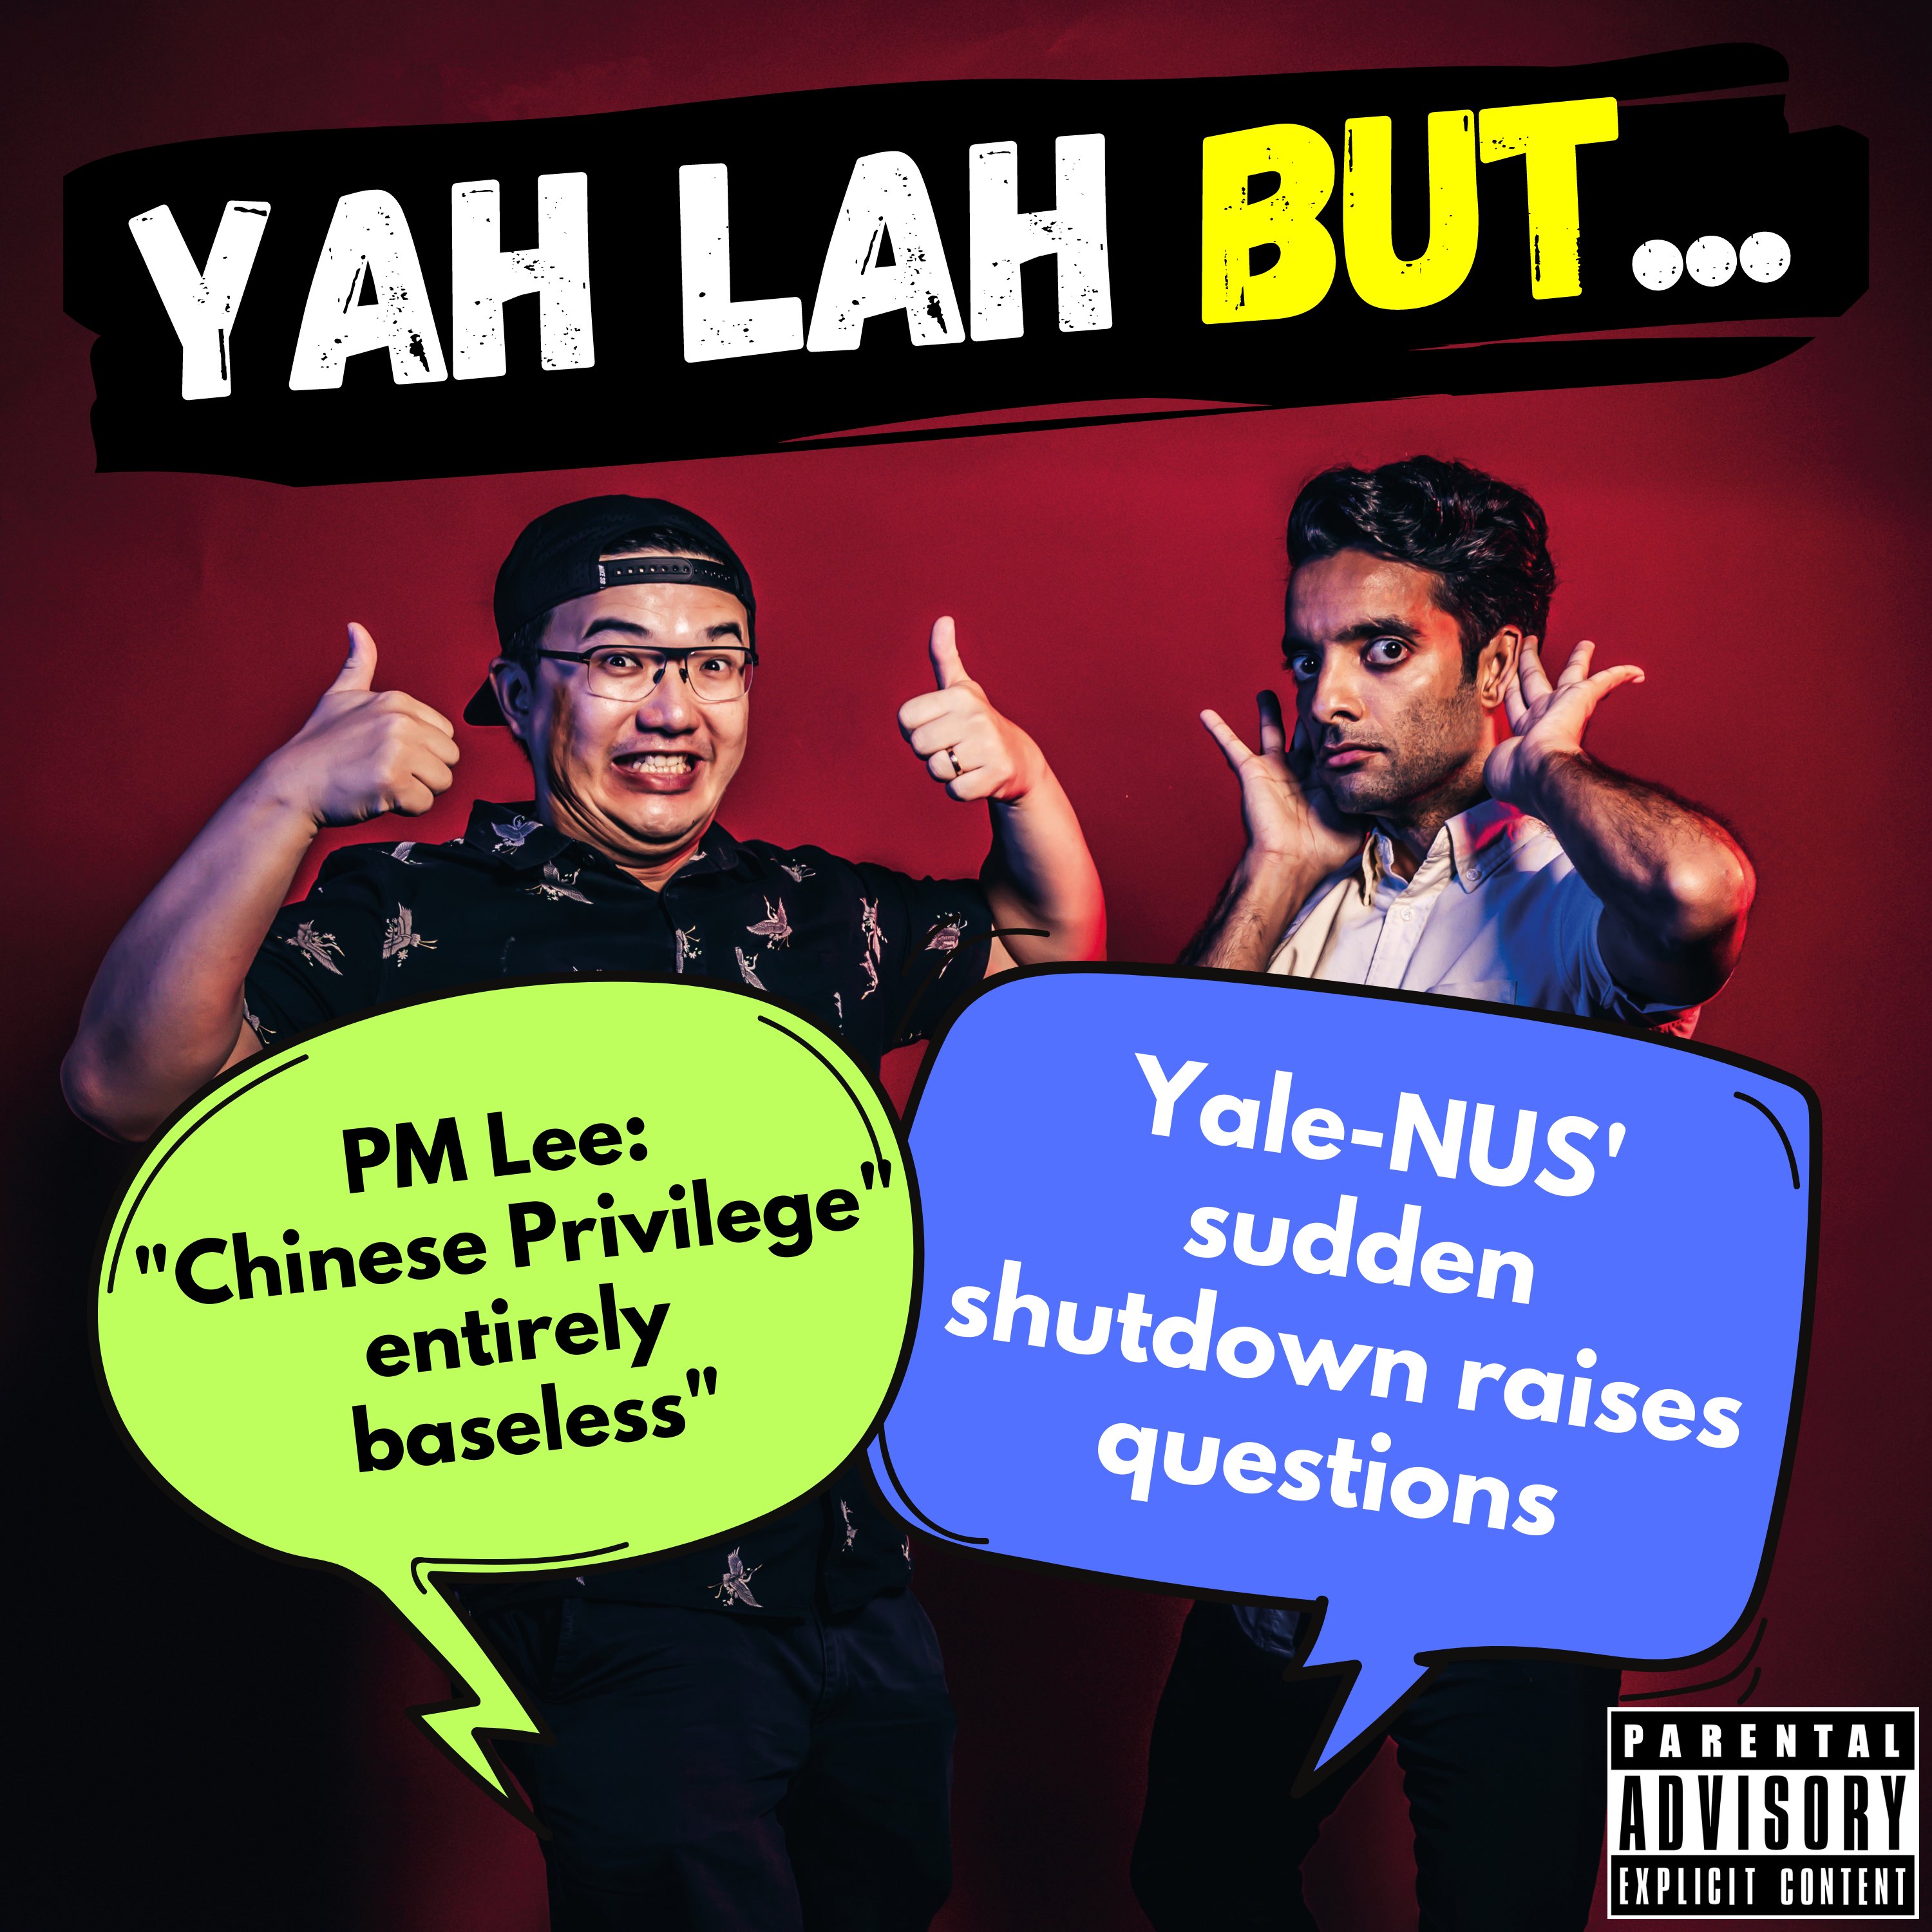 #200 - PM Lee says Chinese Privilege is “entirely baseless” & Yale-NUS announces shock closure